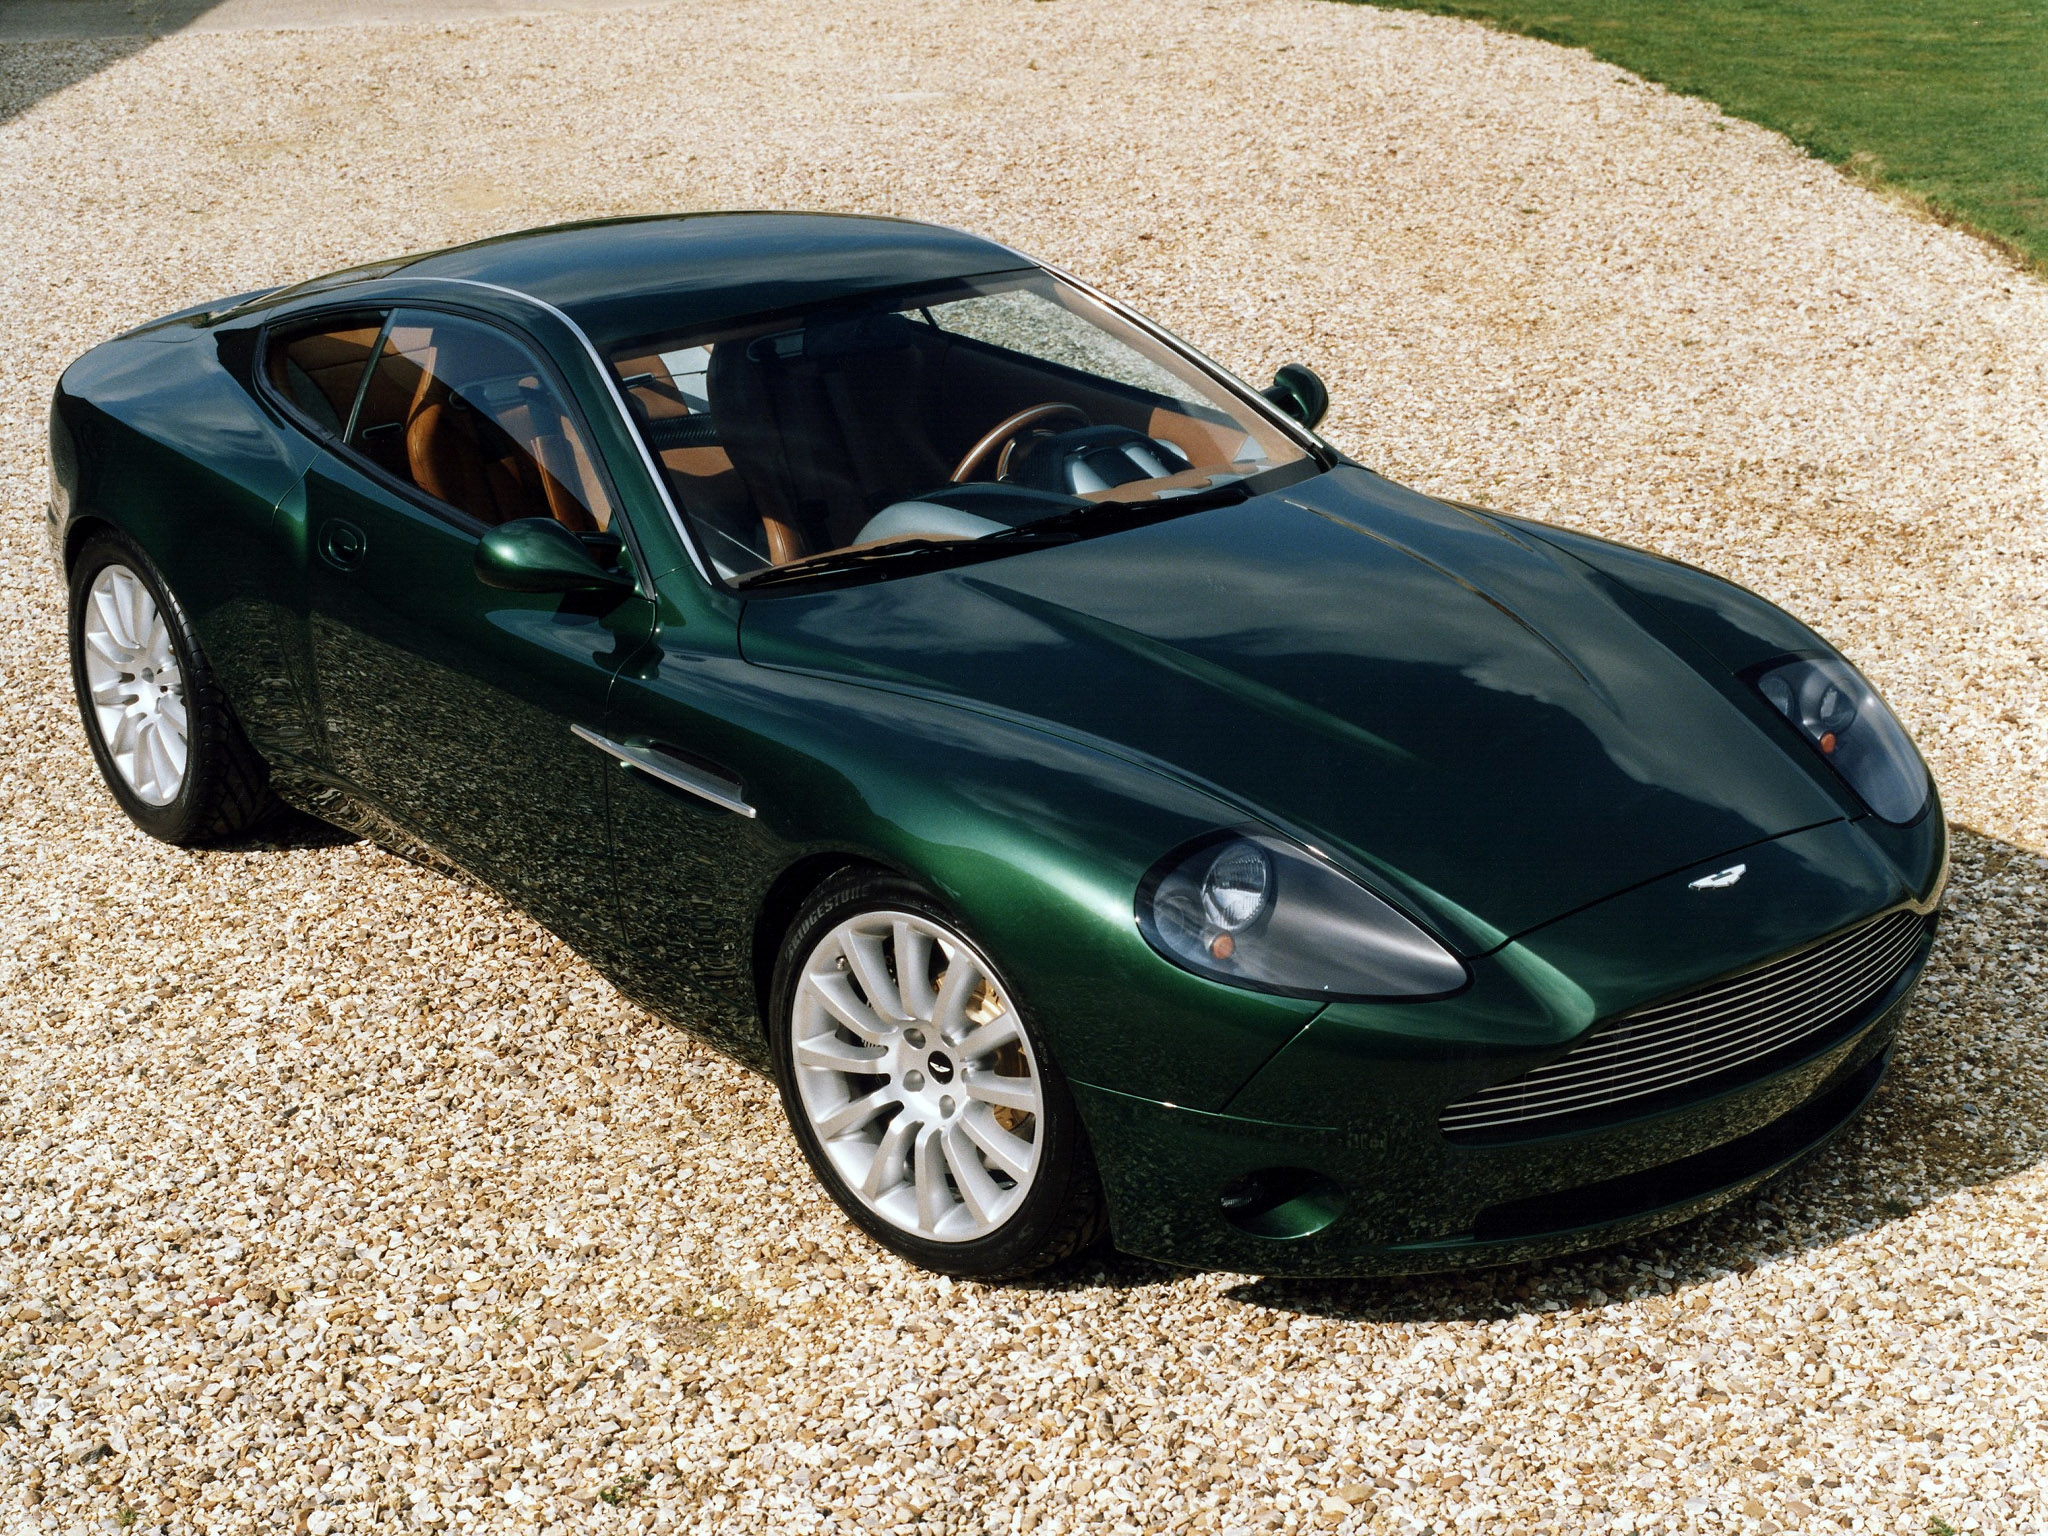 aston martin, auto, cars, green, view from above, concept car, 1998